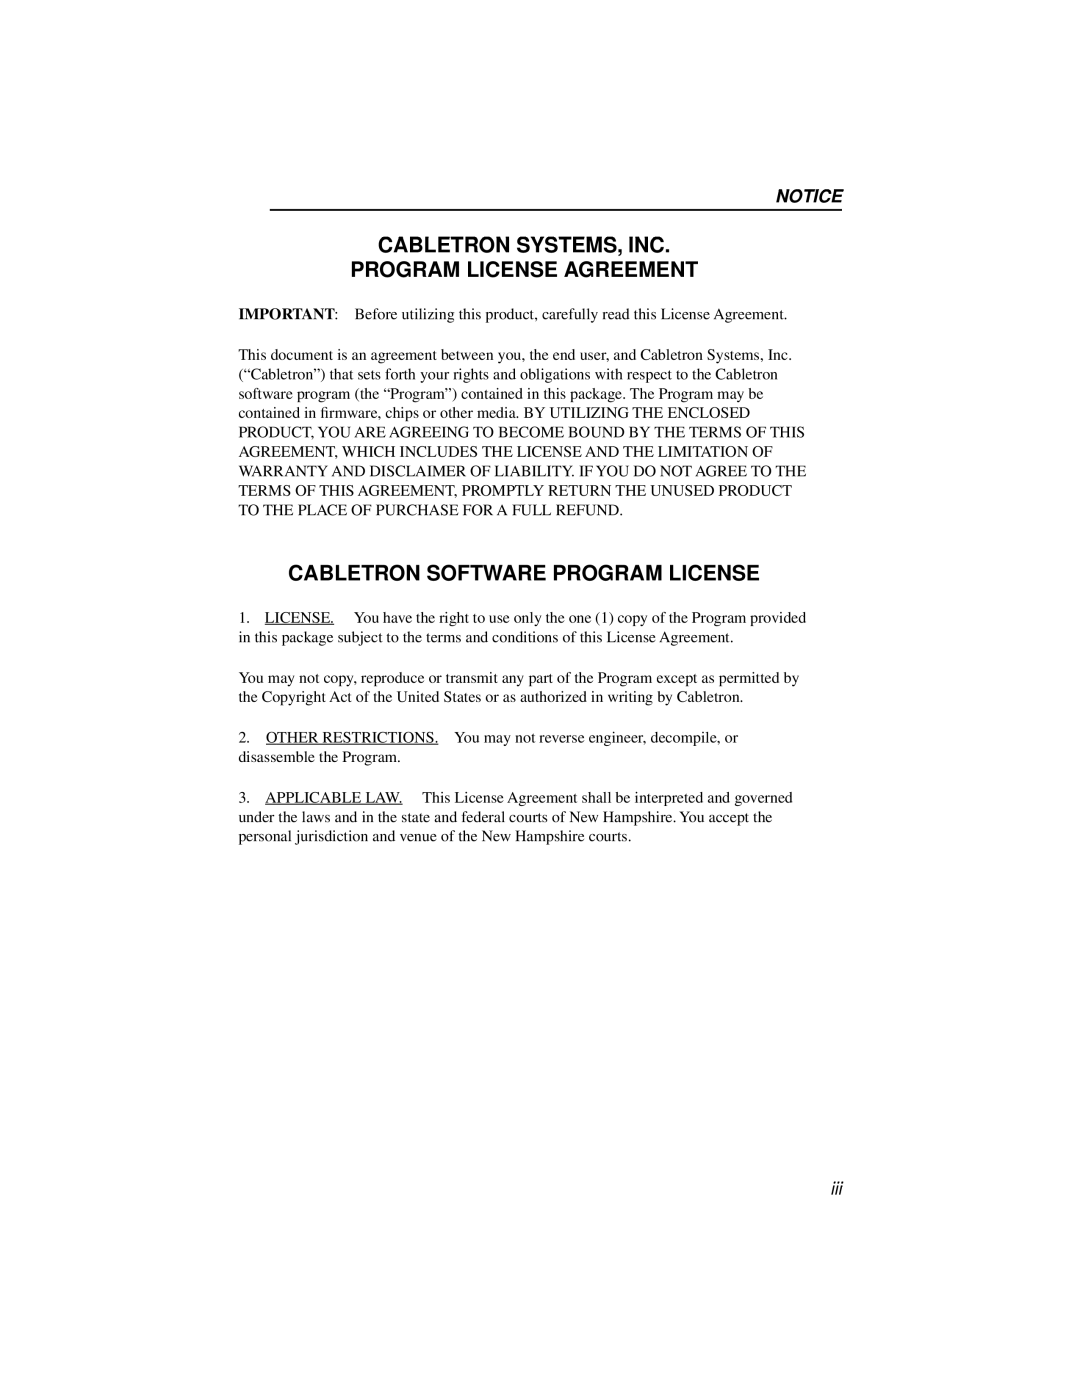 Cabletron Systems BRIM-WT1 manual Cabletron Systems, Inc Program License Agreement, Cabletron Software Program License 